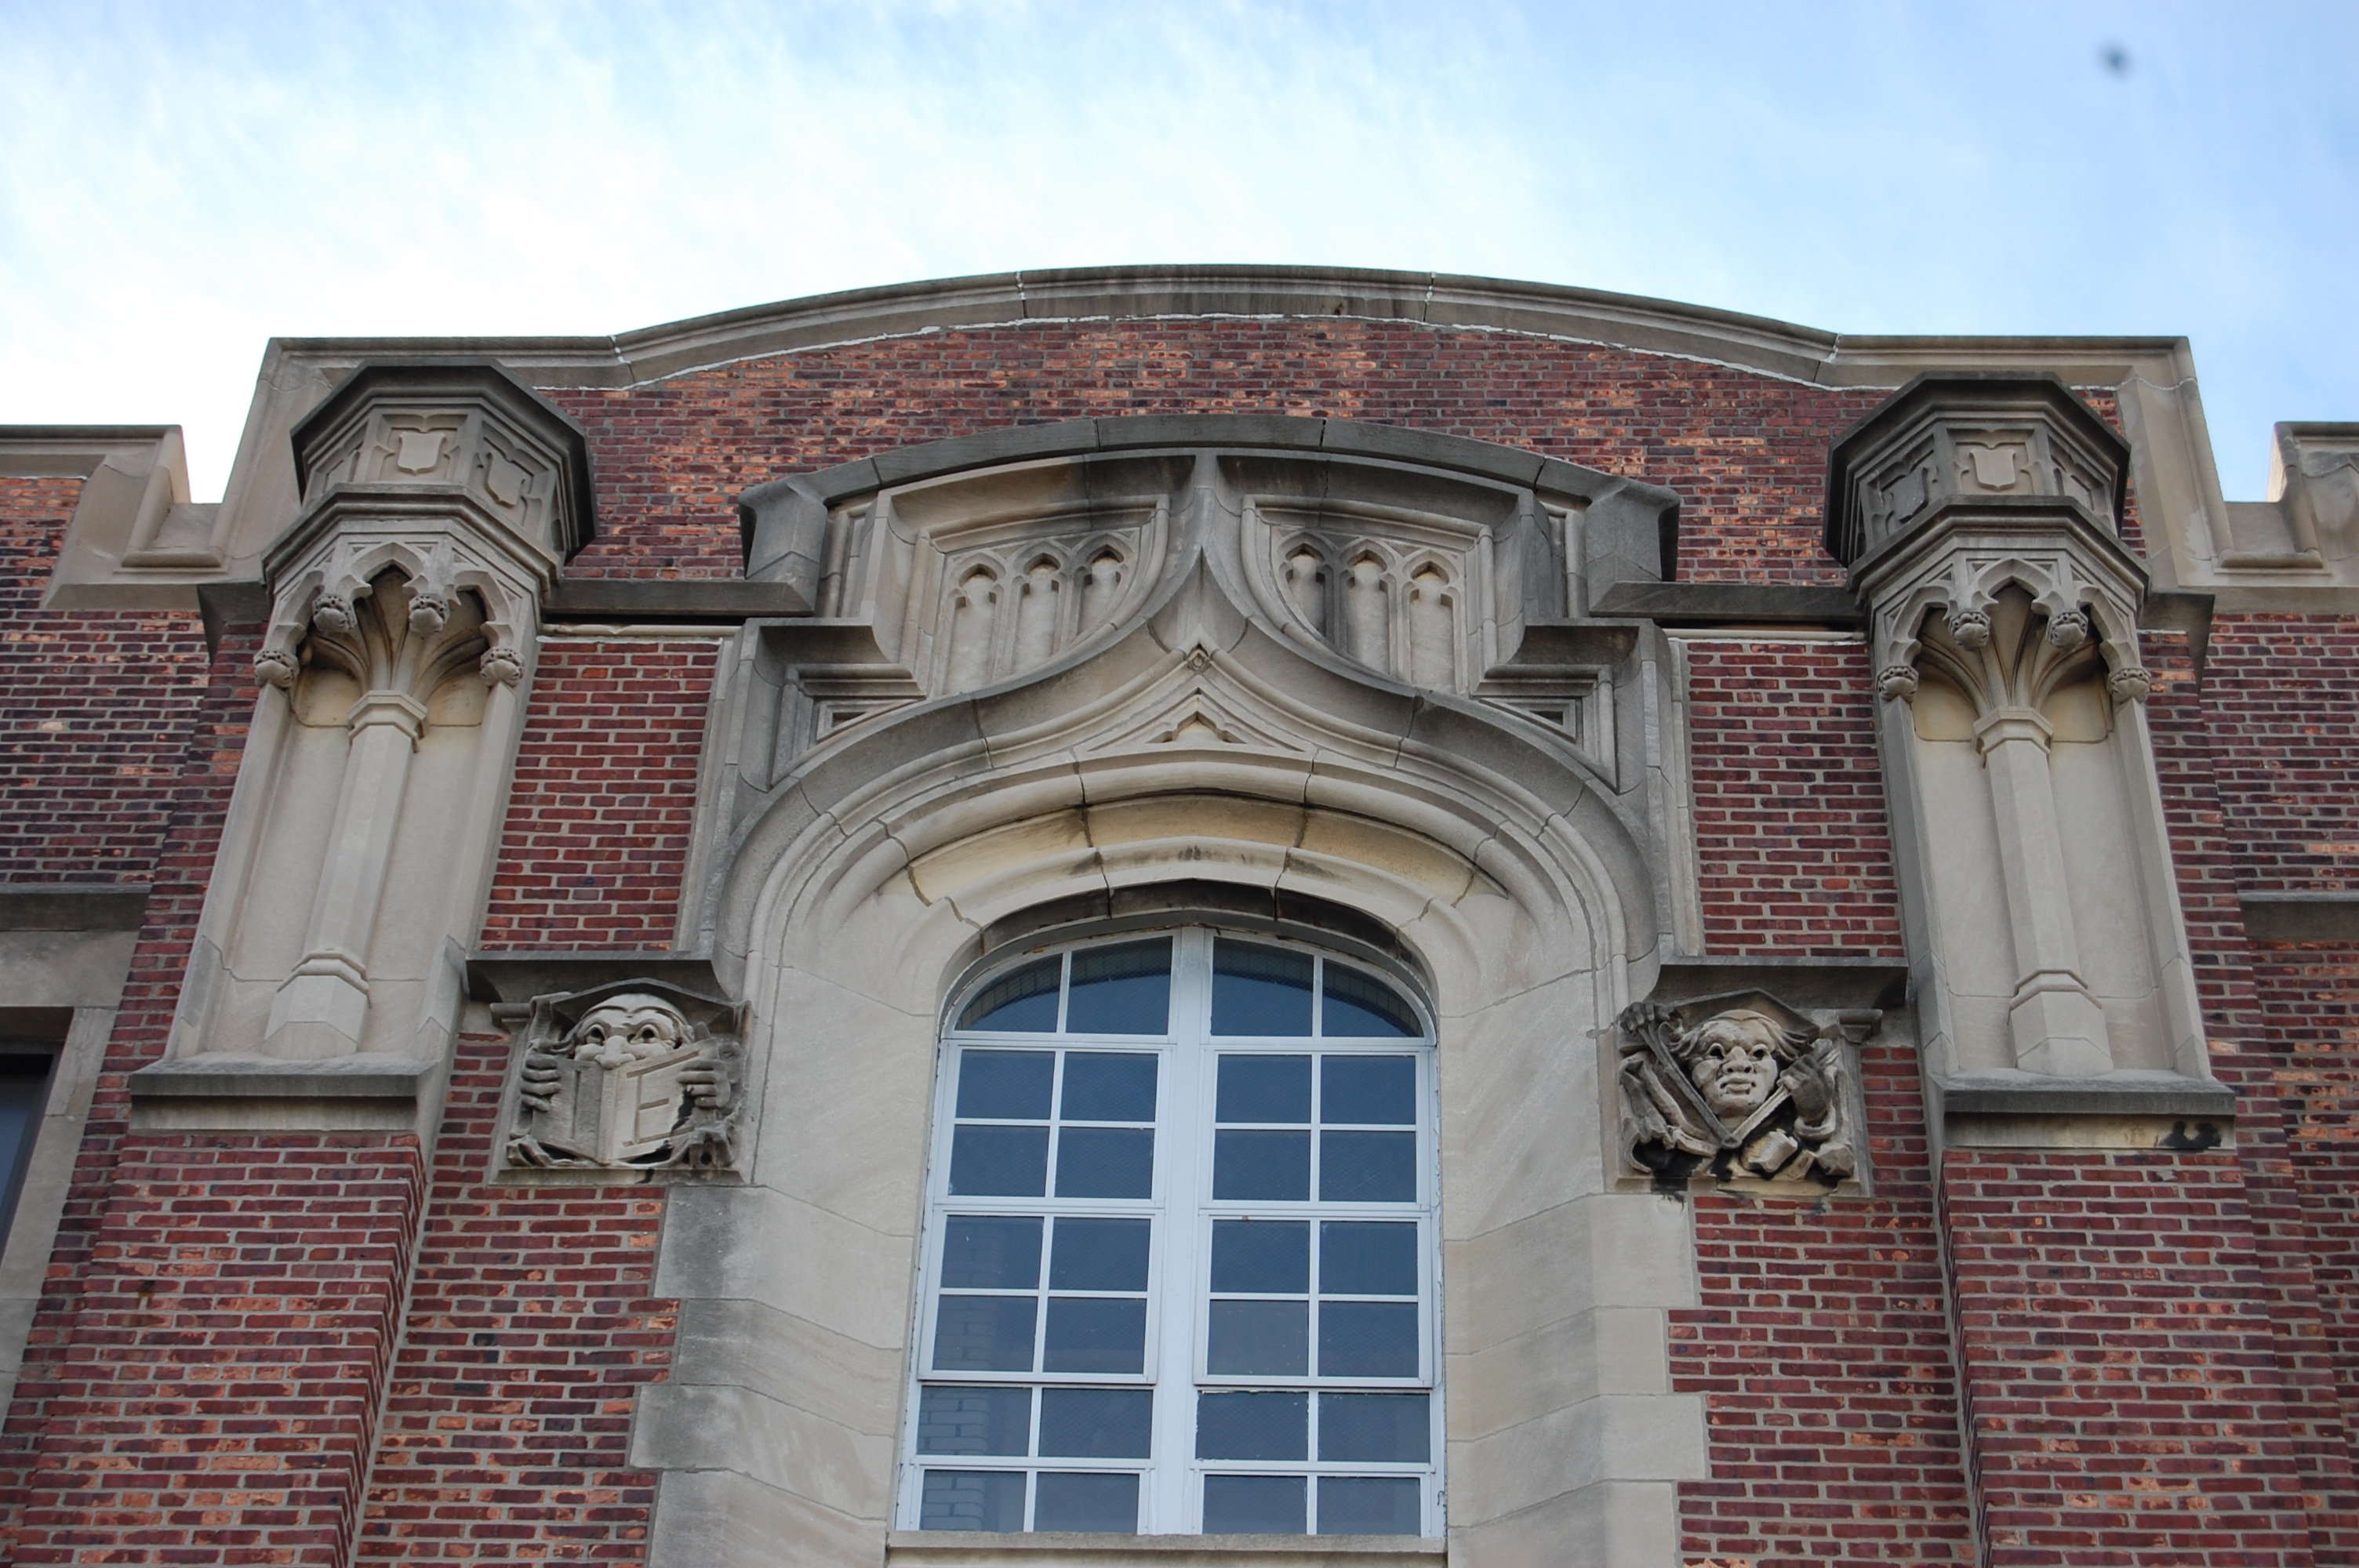 Gothic details were common in deCourcy Richards buildings. He designed 30 schools for the district.